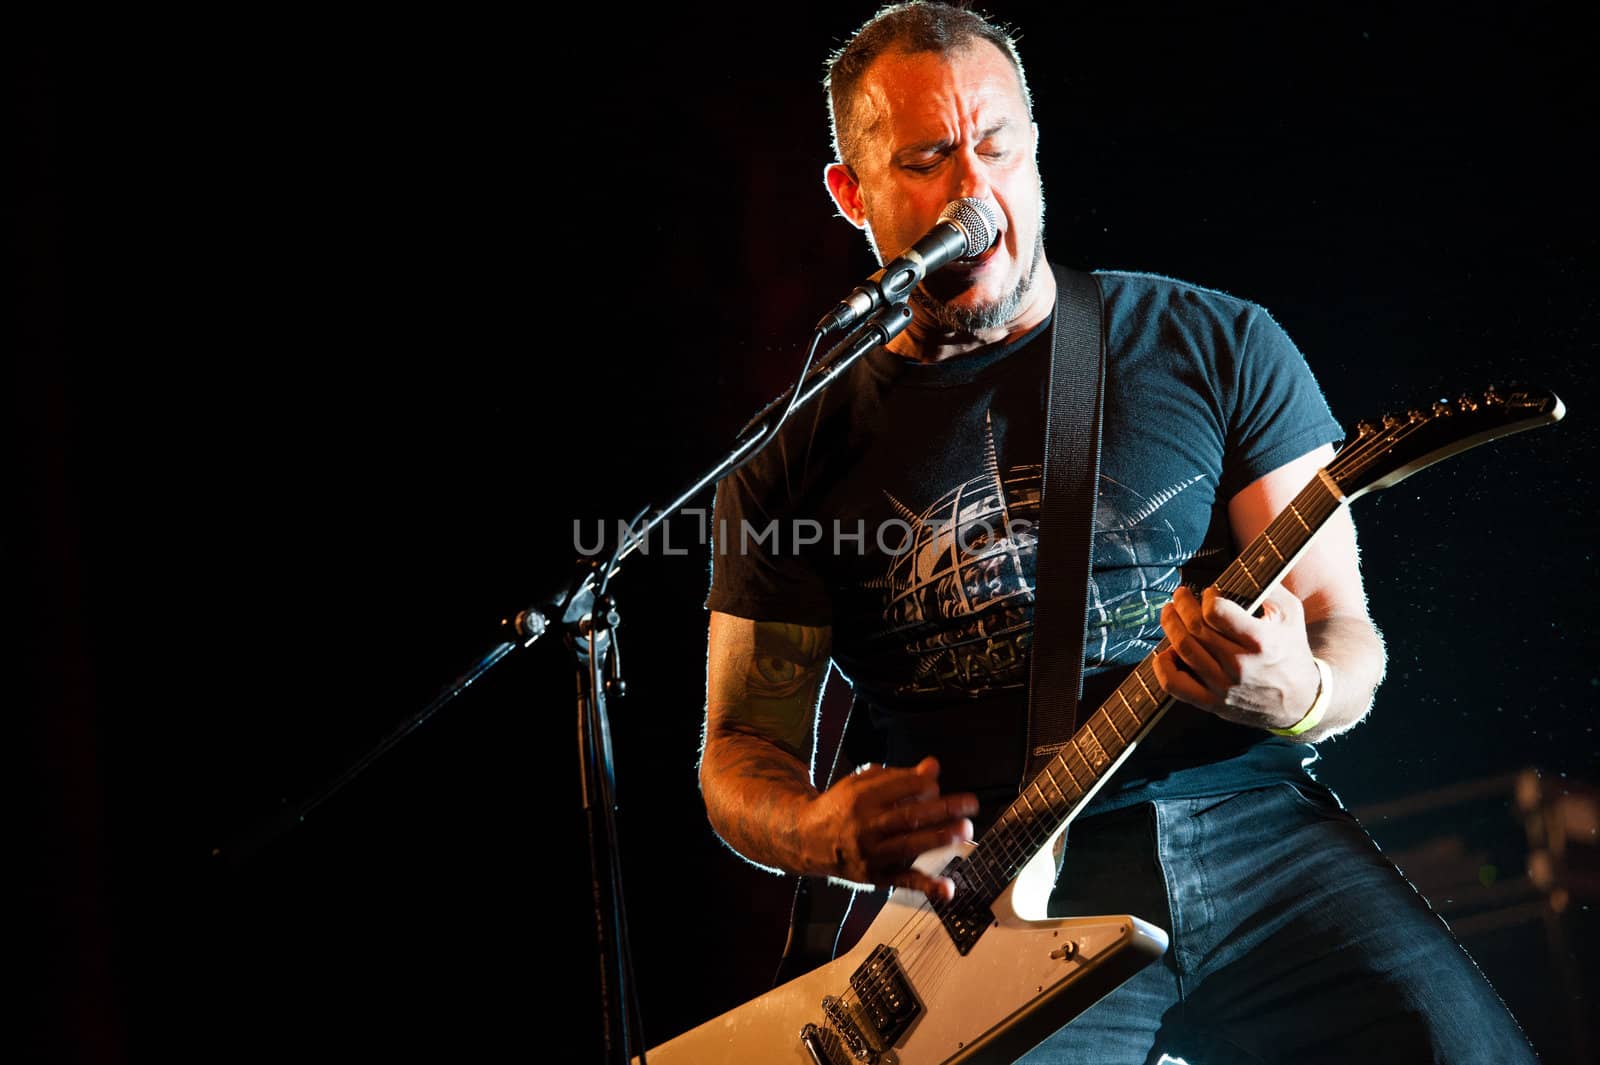 CANARY ISLANDS, SPAIN-JUNE 30: Singer and guitarist Brigido Duque from the band Koma, from Navarra in Spain, perform during Cebollinazo Rock in Galdar on June 30, 2012 in Canary Islands, Spain